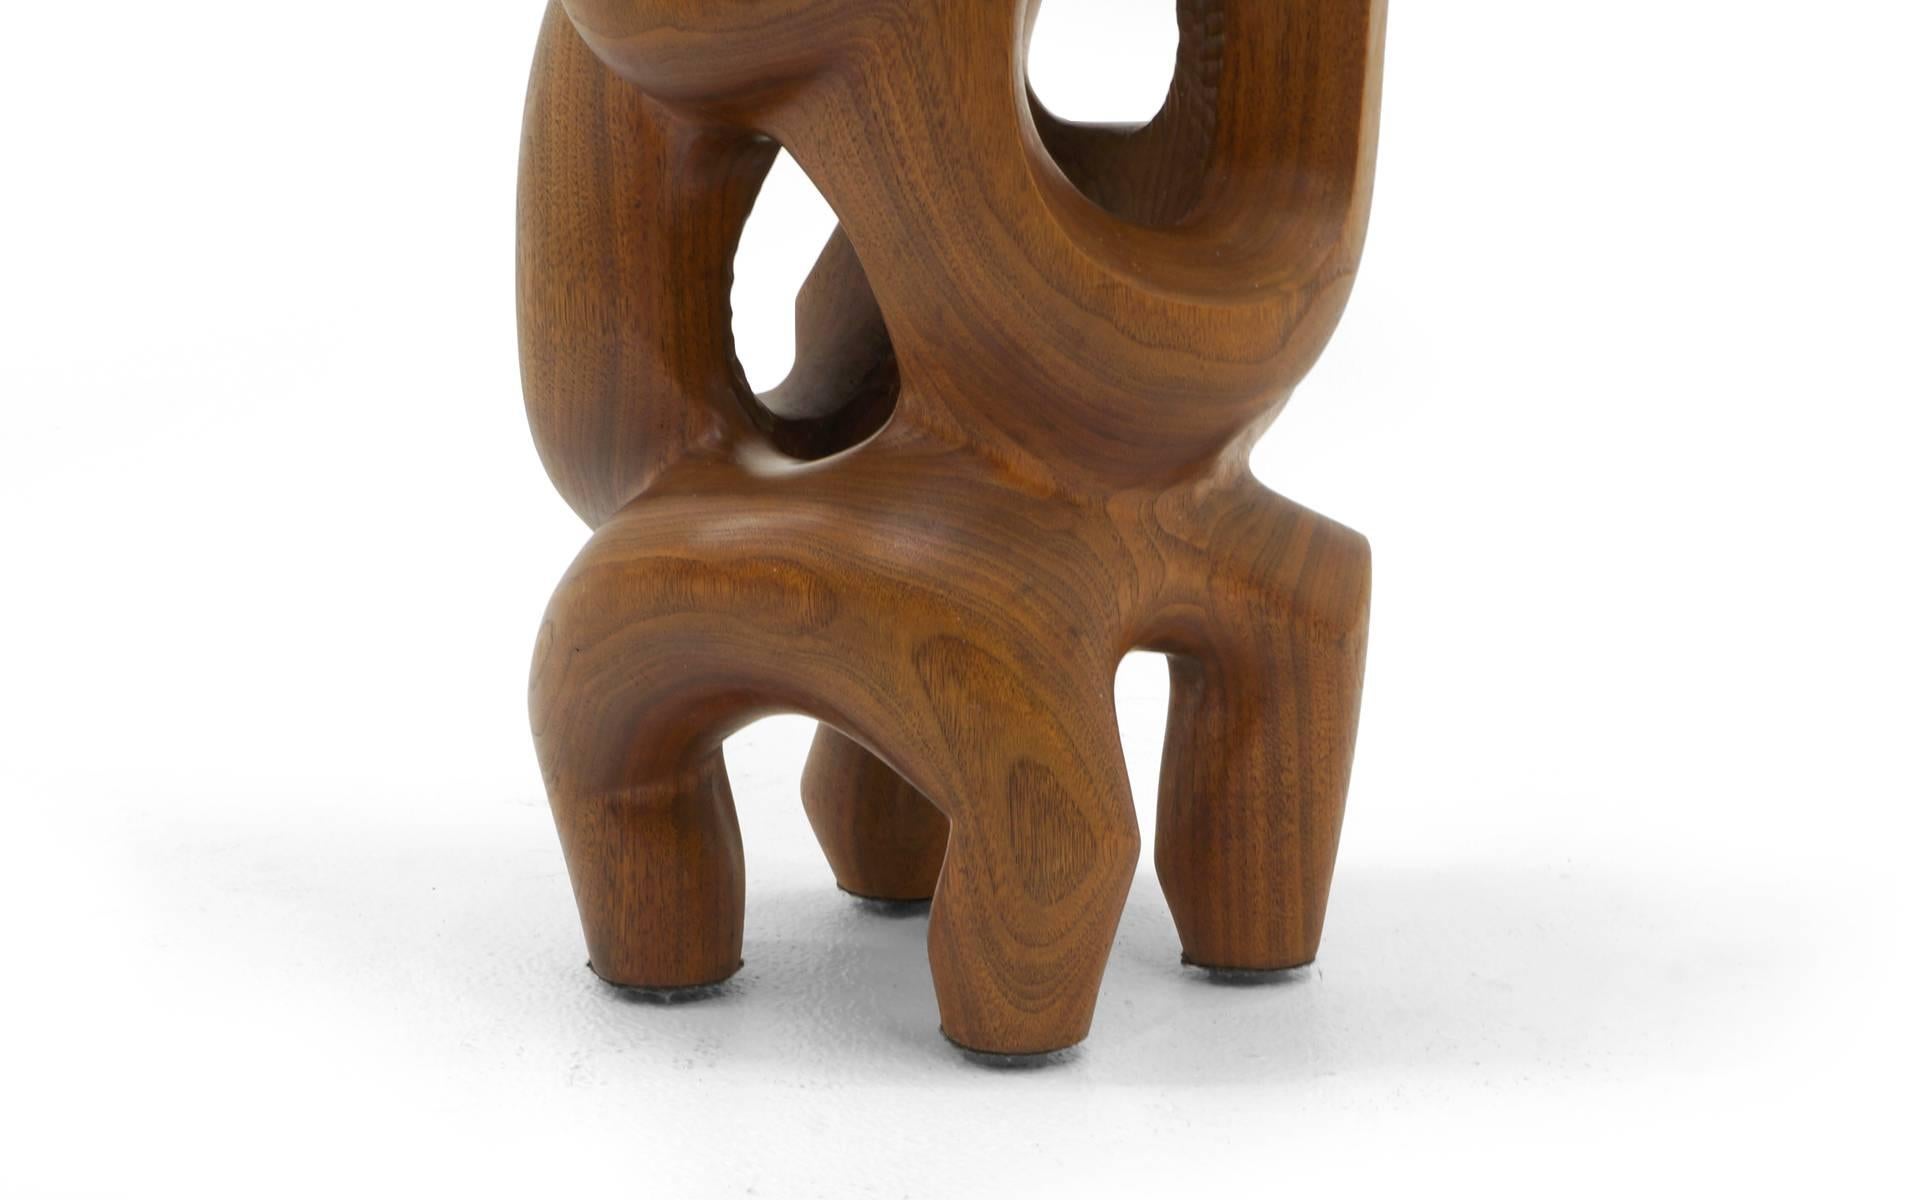 Hand-Carved Walnut Tabletop Sculpture by Cecil C. Carstenson, 1950